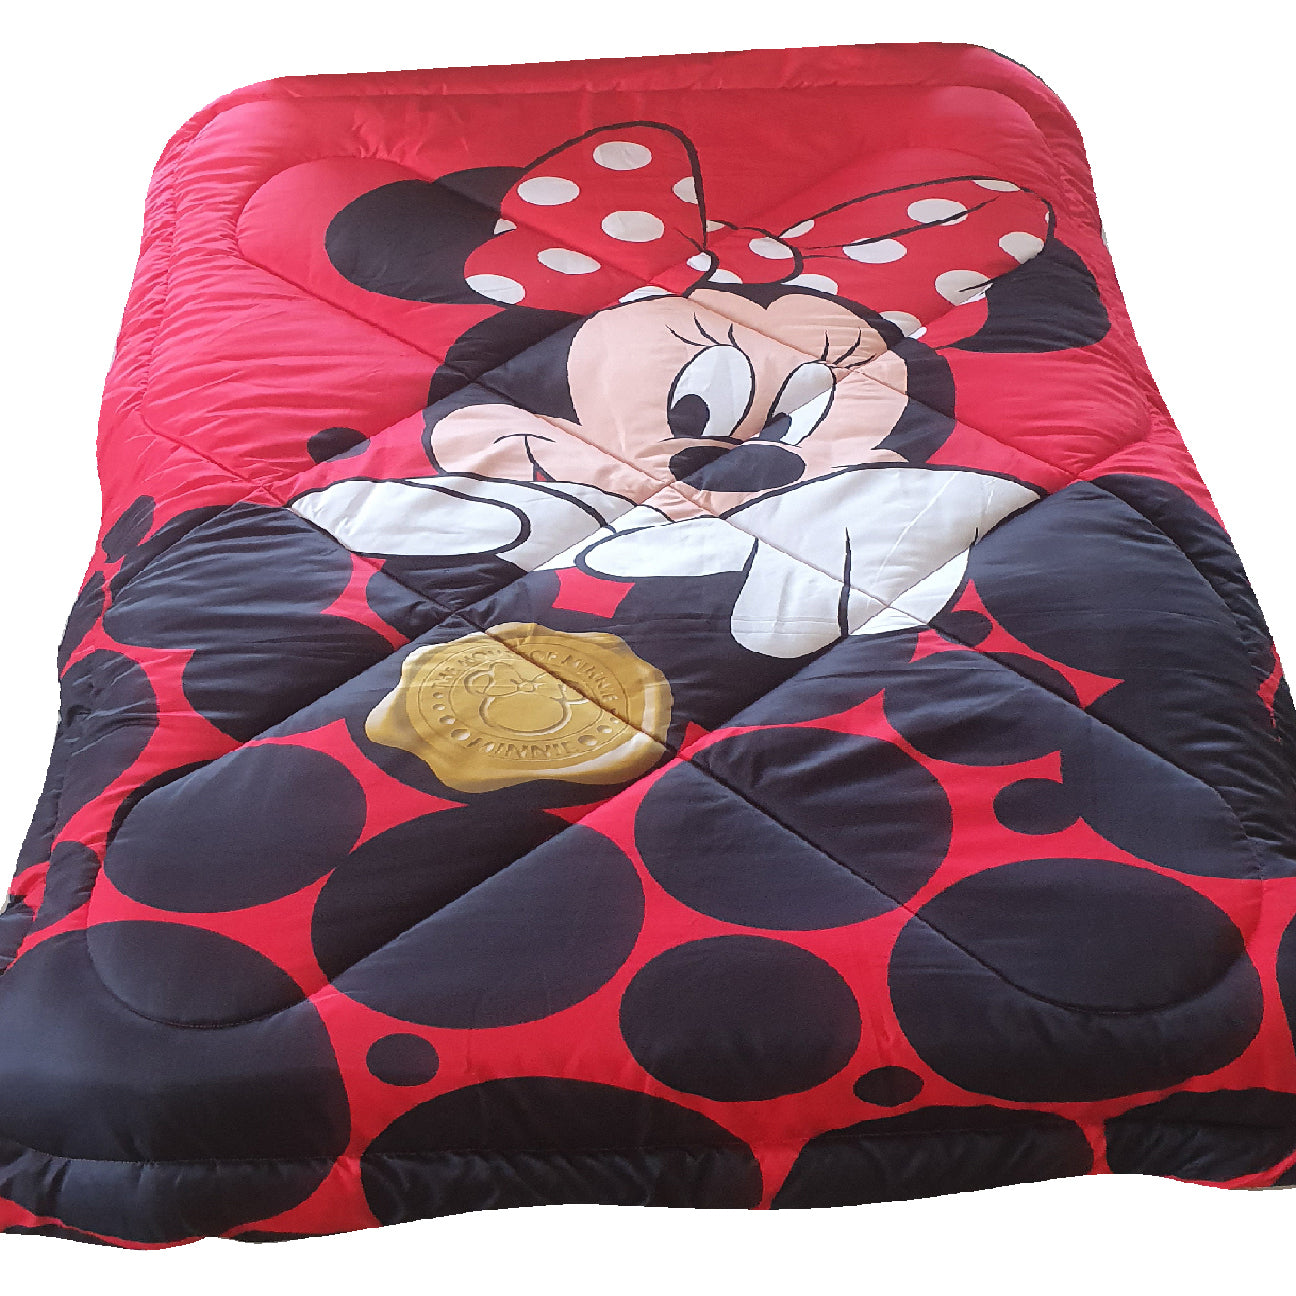 Minnie Mouse House Comforter